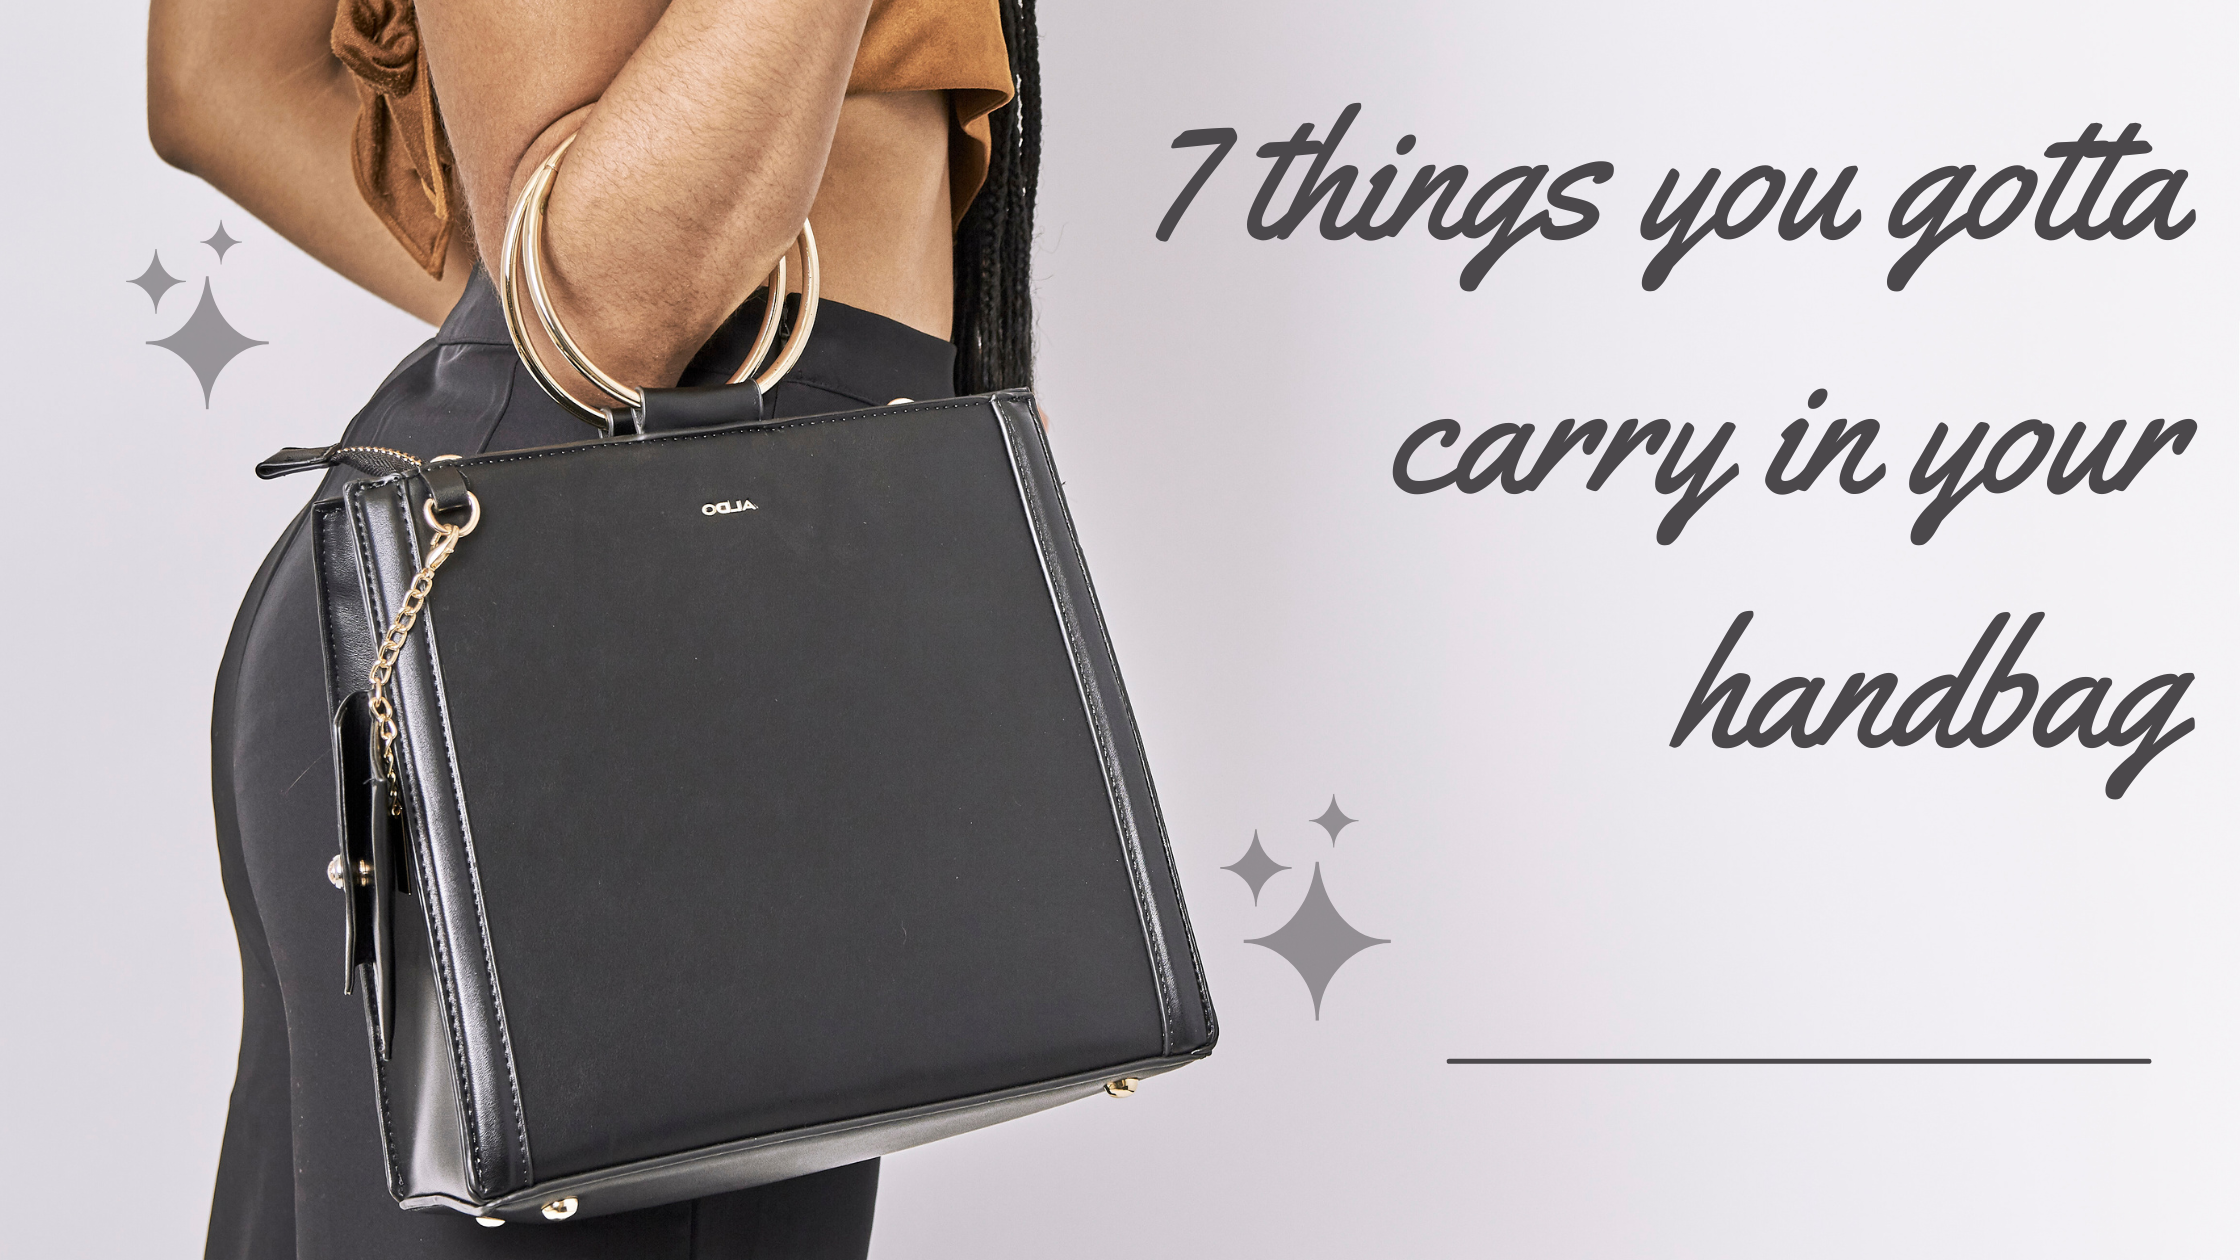 7 things you gotta carry in your handbag 